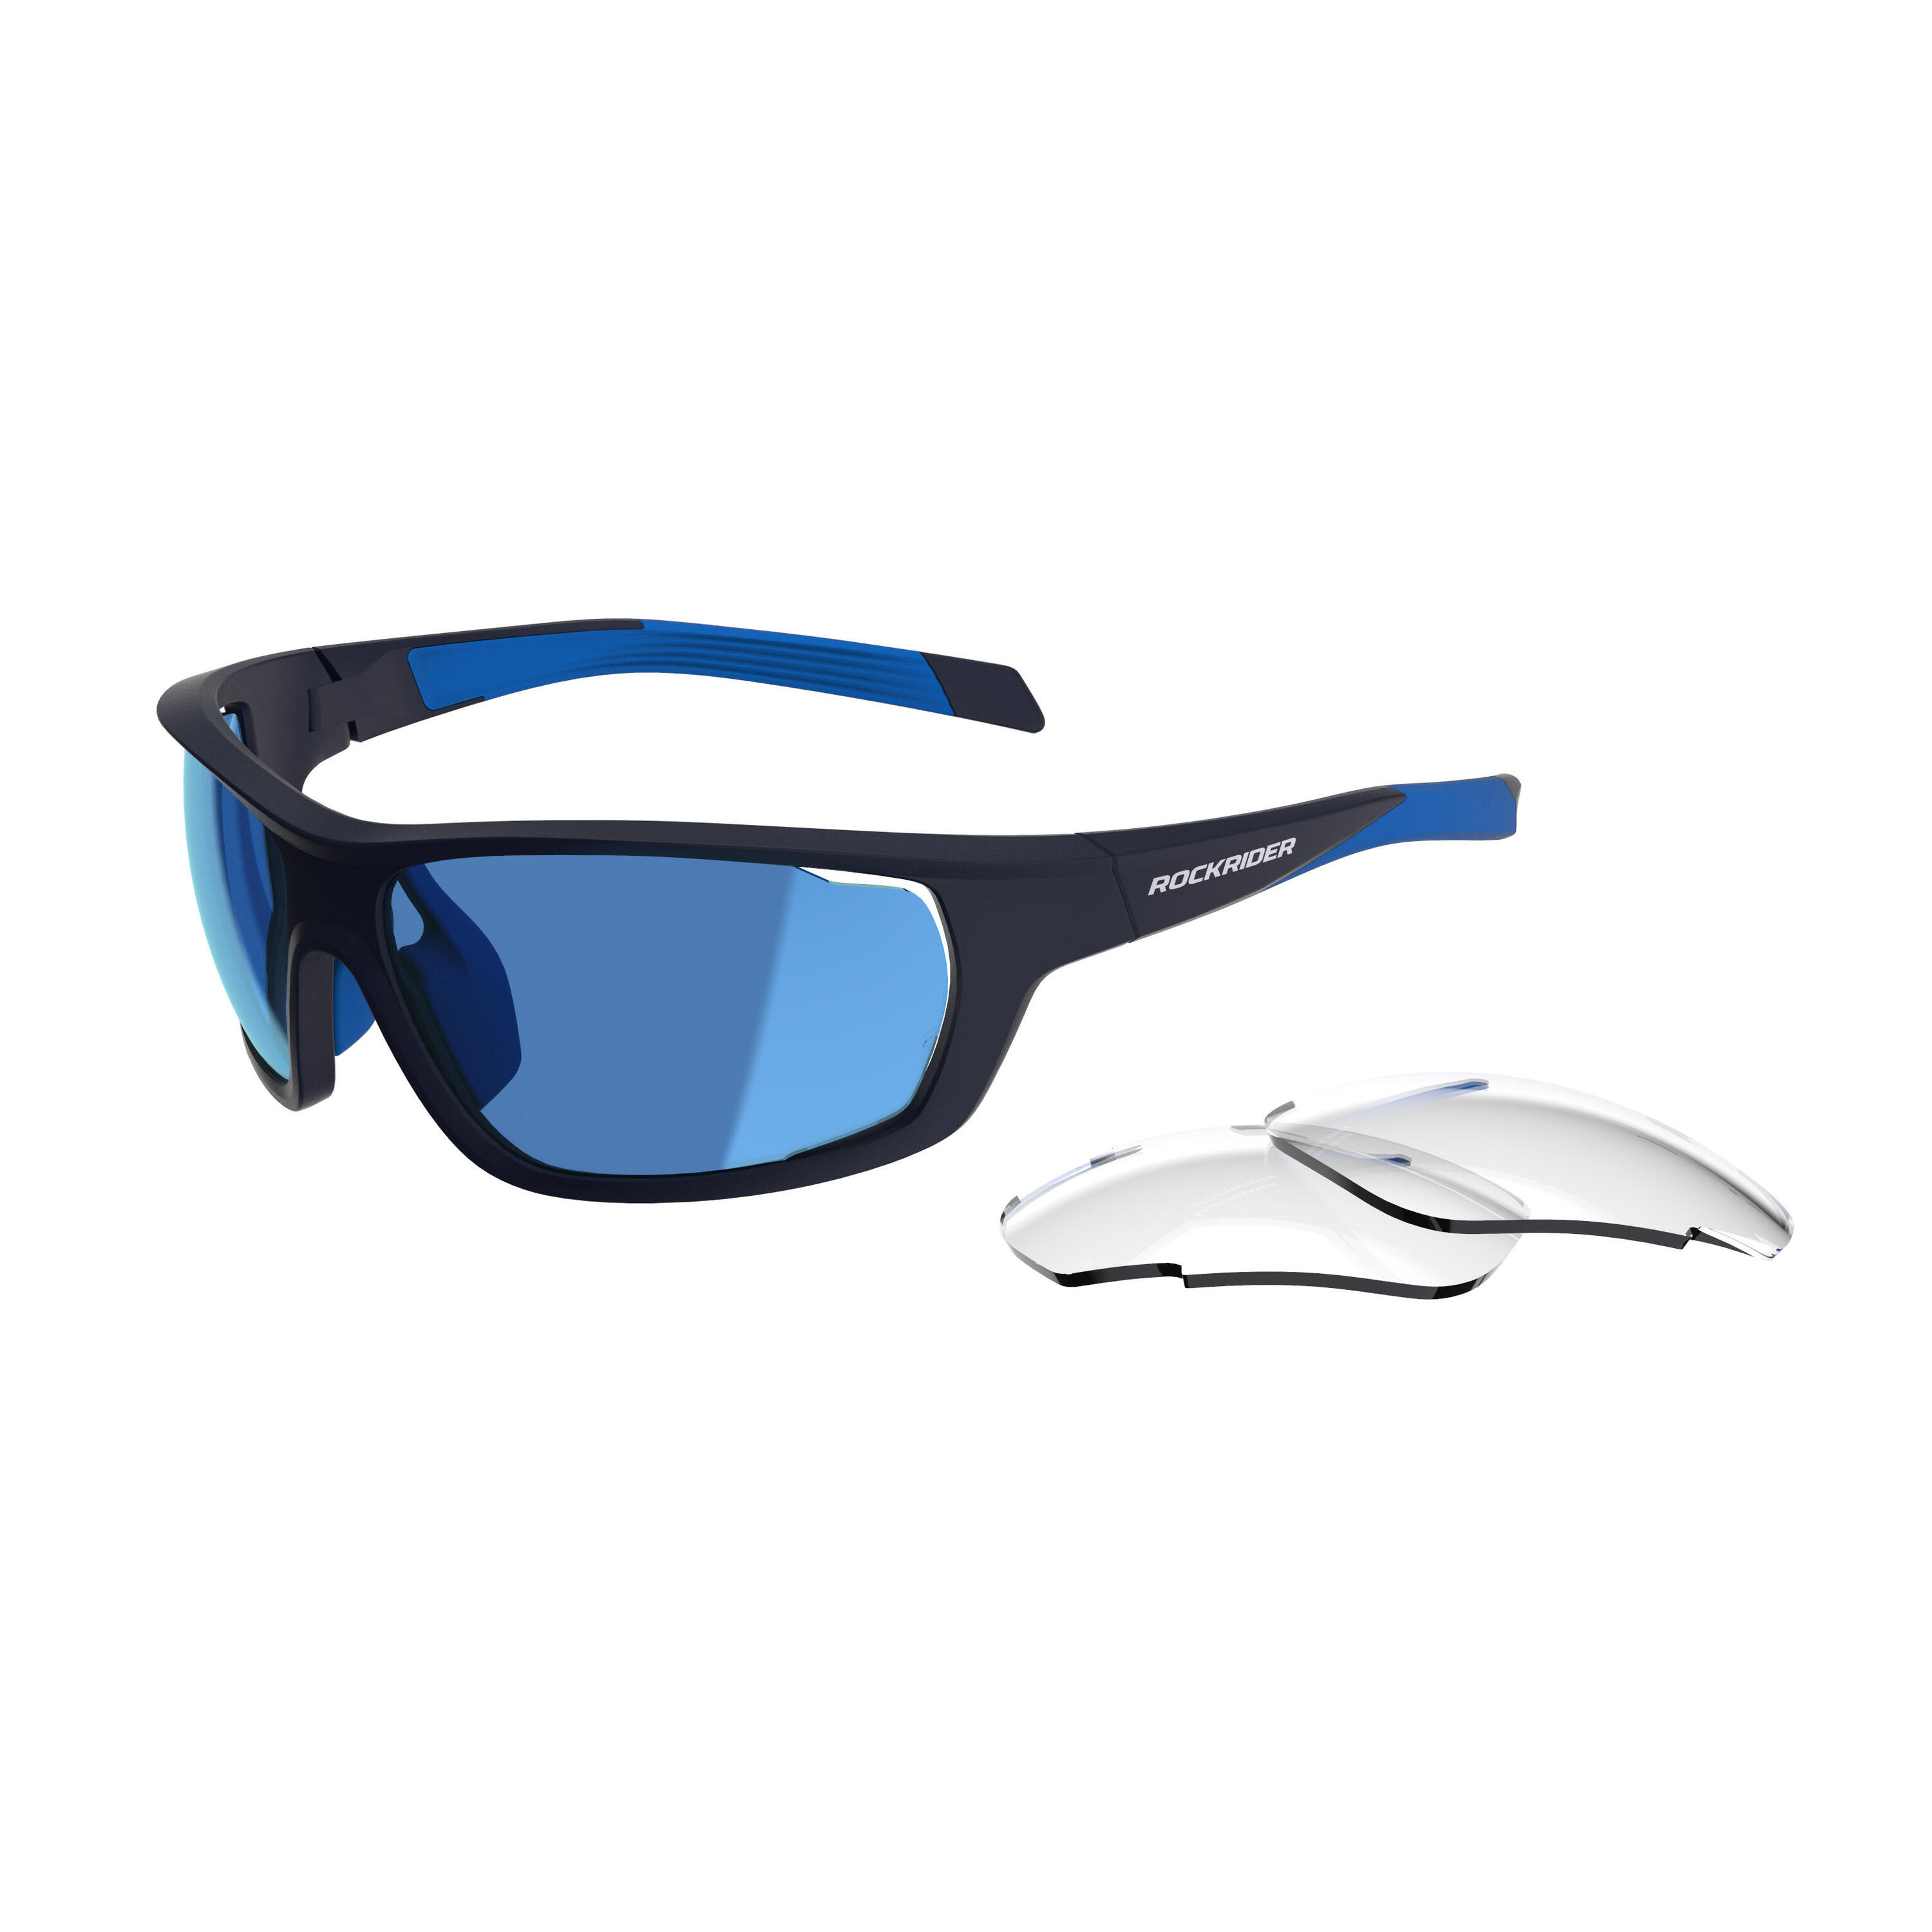 ROCKRIDER Cycling Glasses Perf 100 Pack Interchangeable CAT 0+3 Lenses - Blue